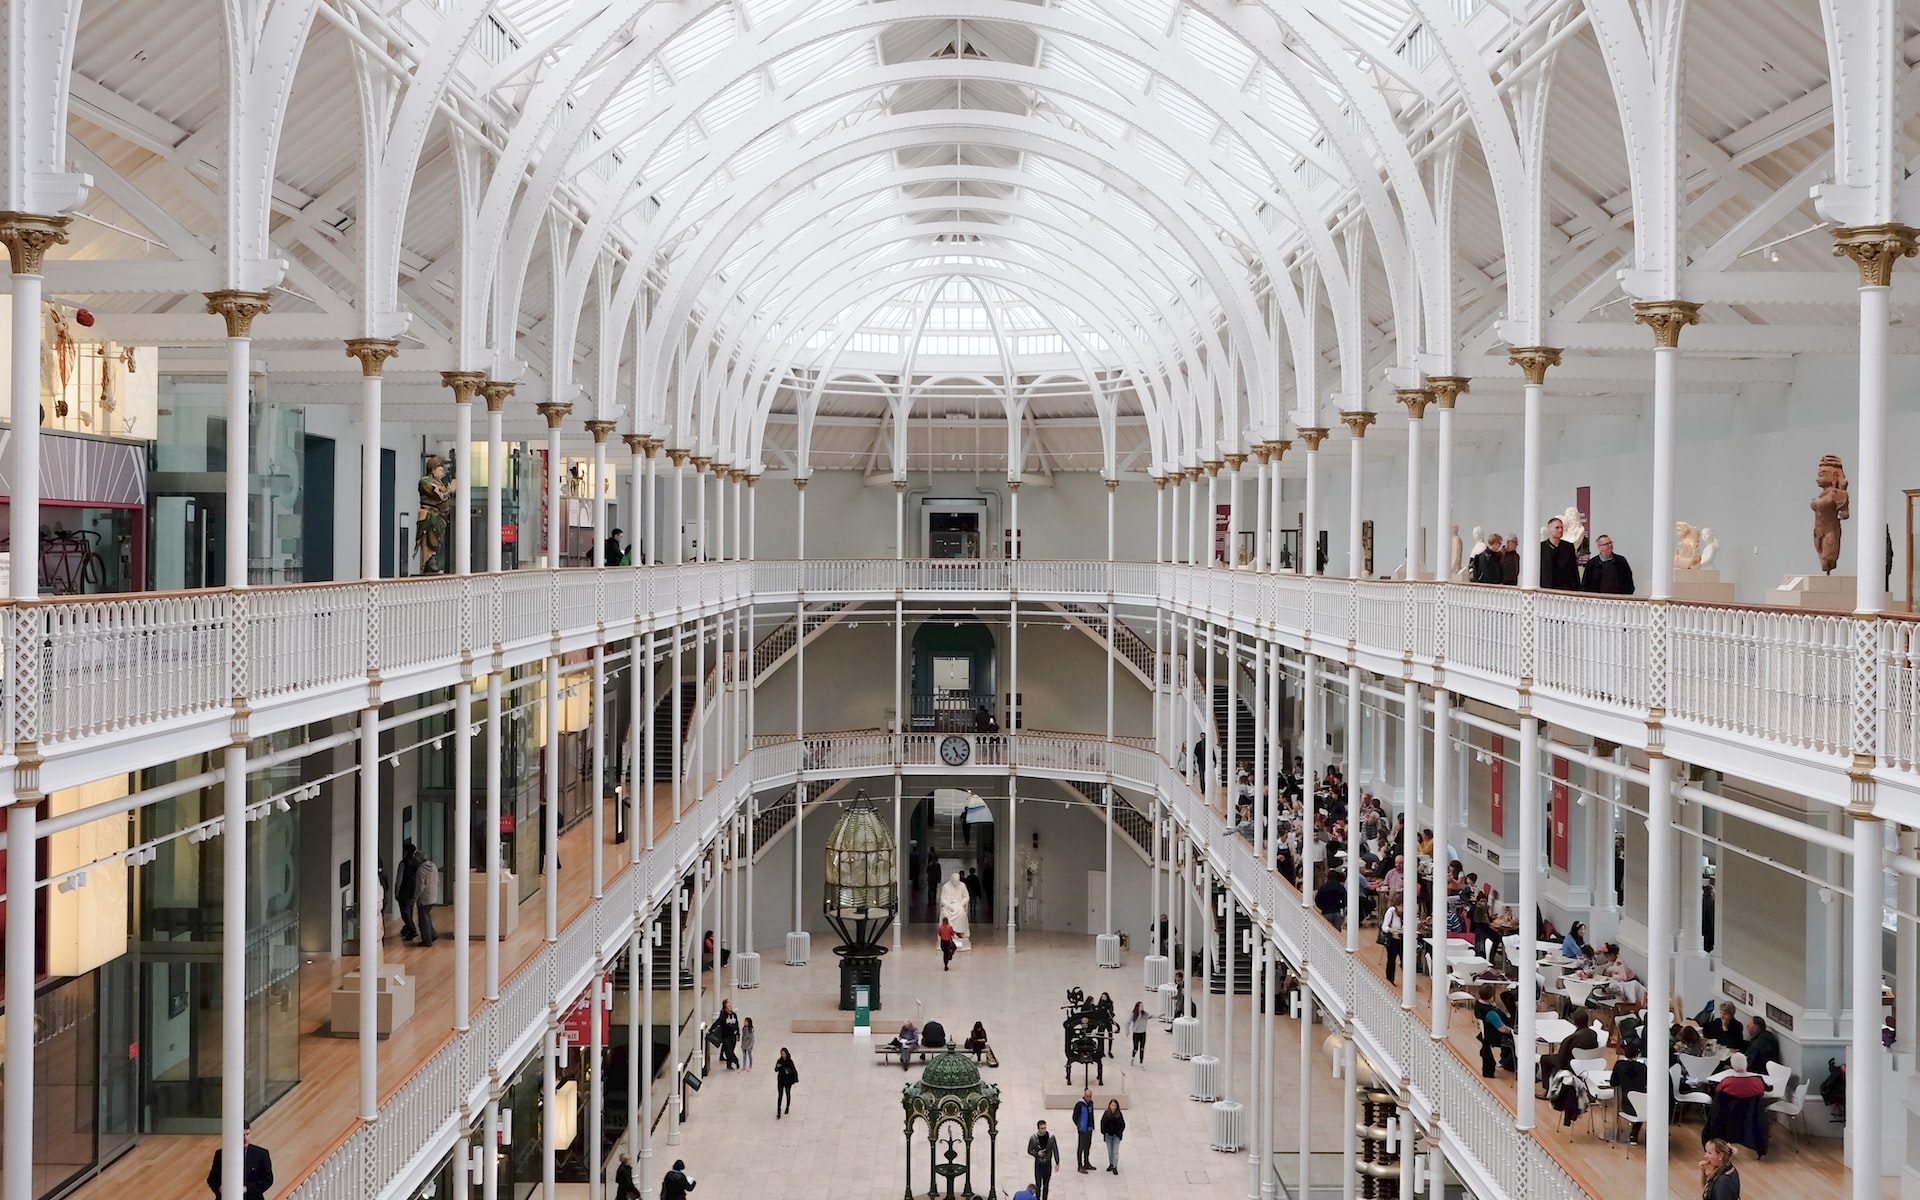 The interior of the National Museum of Scotland.